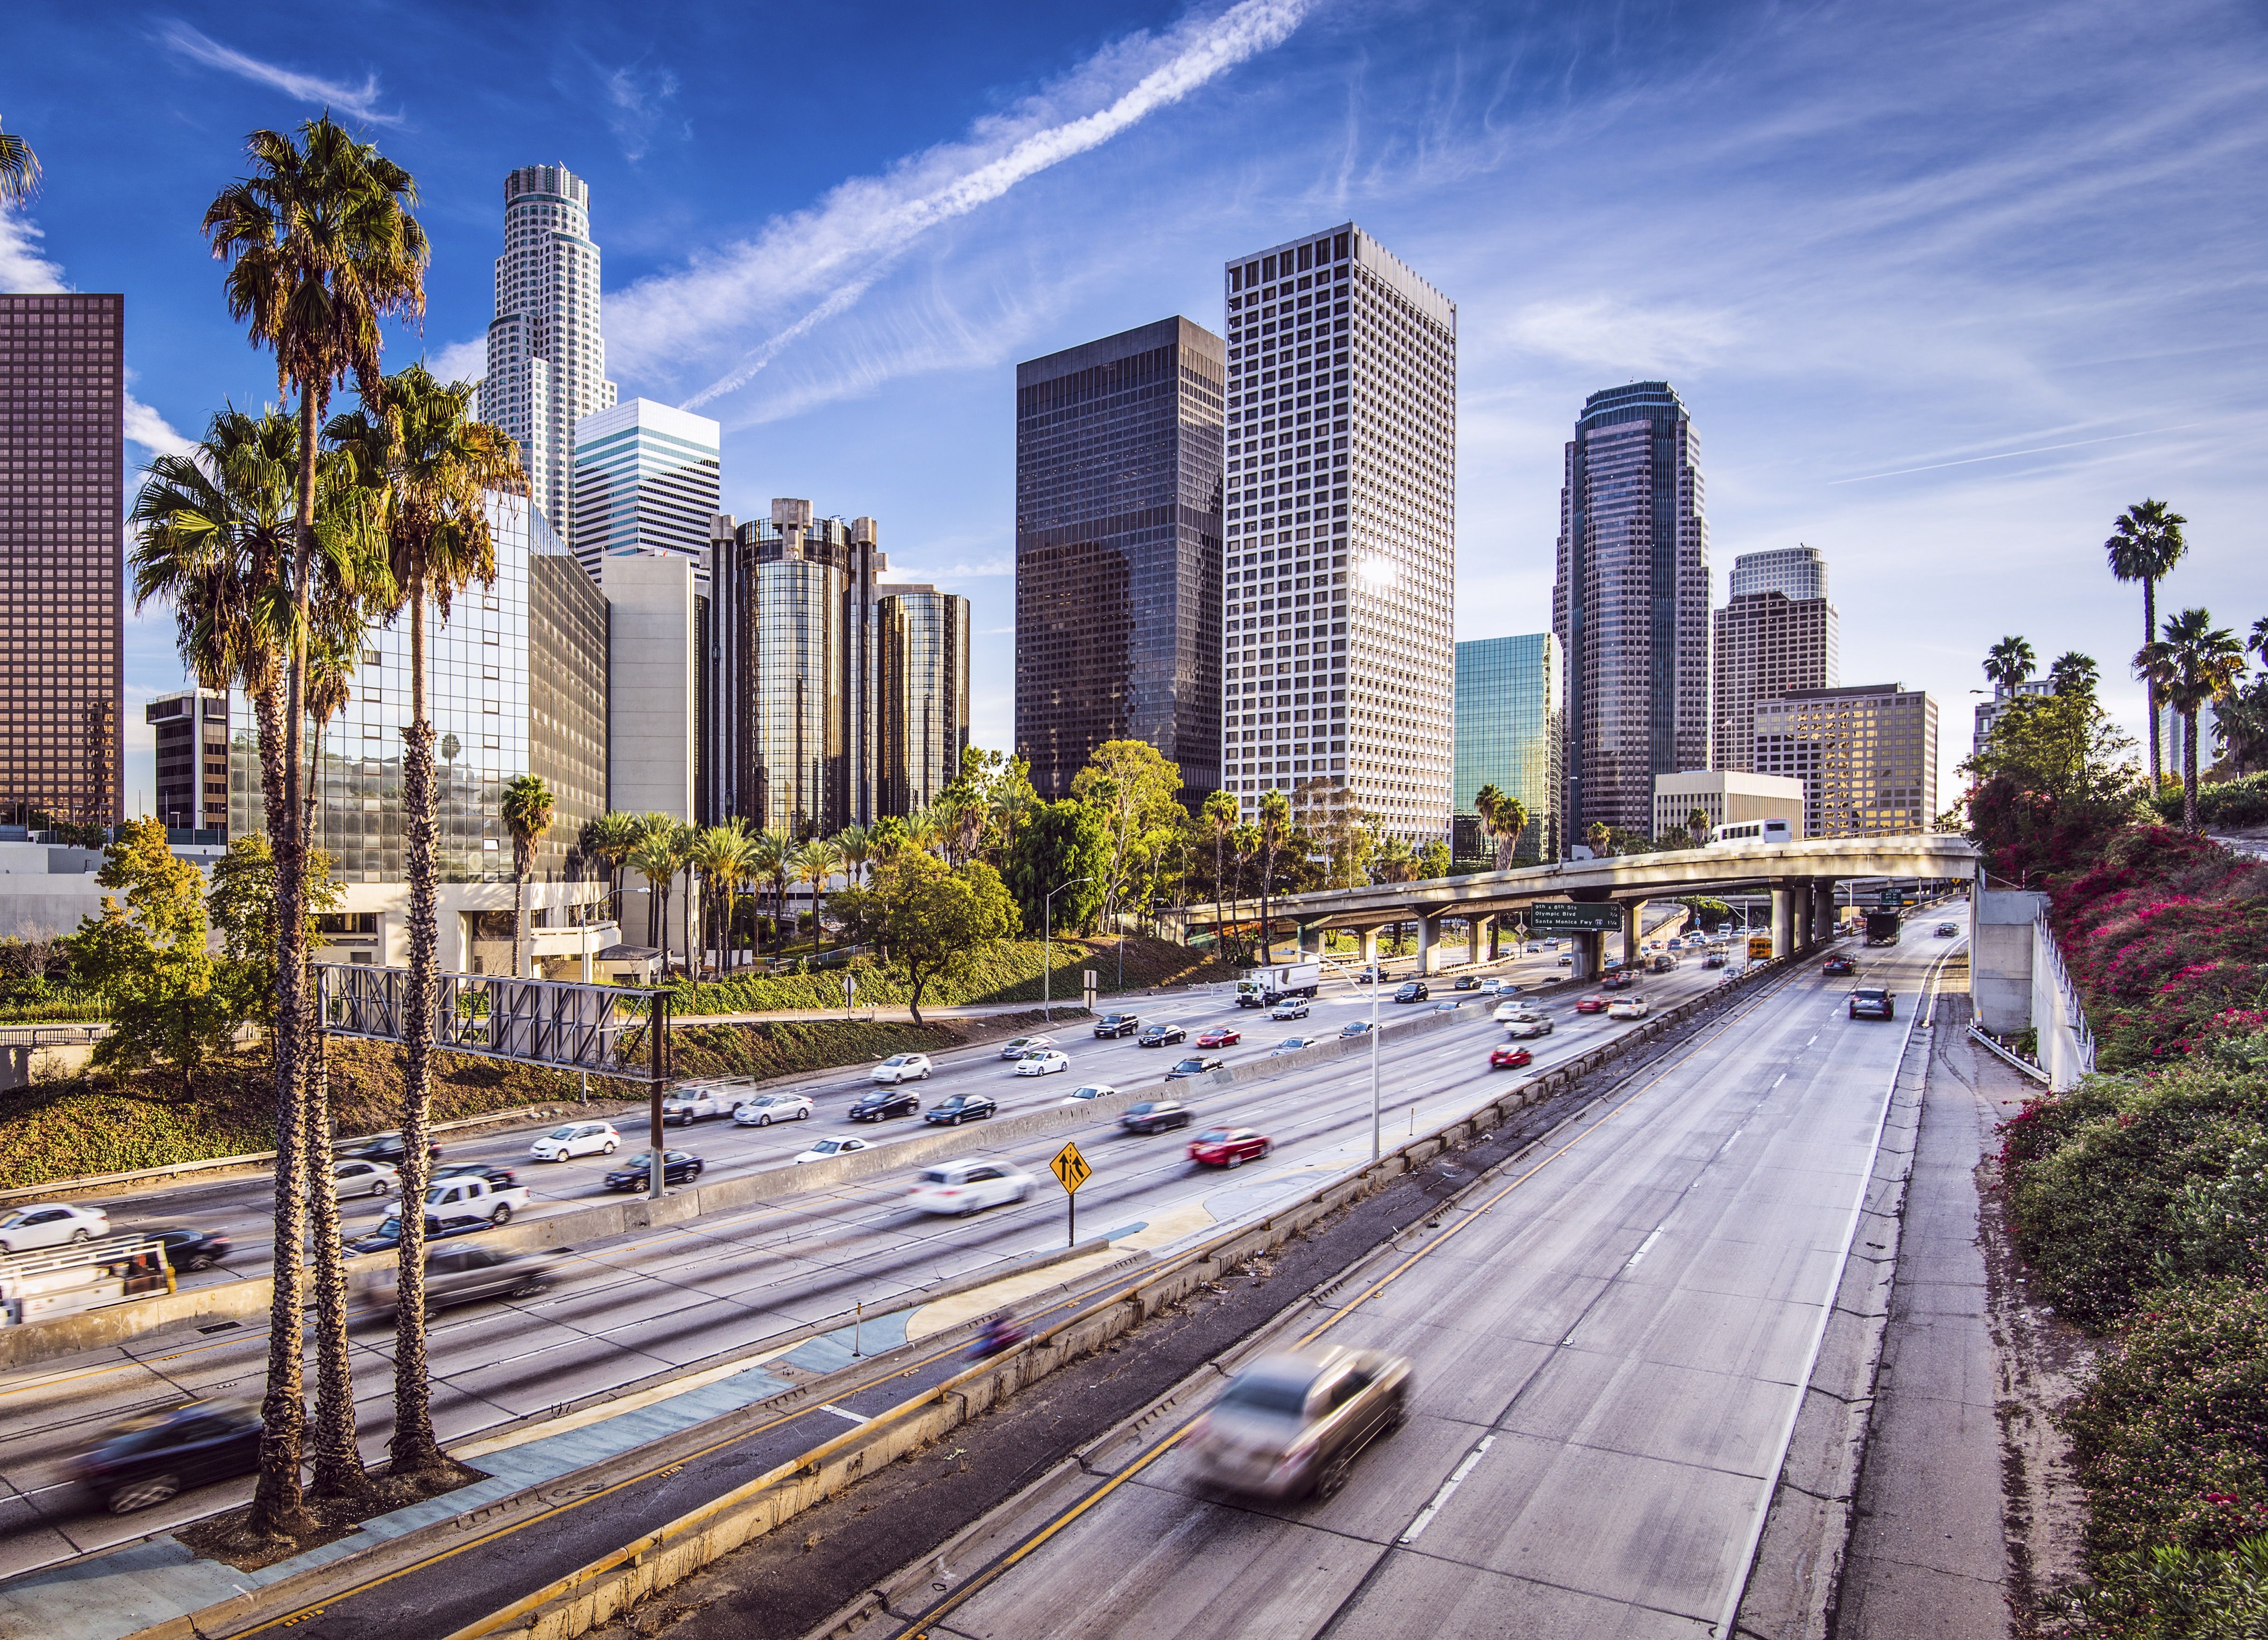 64+ Los Angeles City Wallpapers: HD, 4K, 5K for PC and Mobile | Download  free images for iPhone, Android